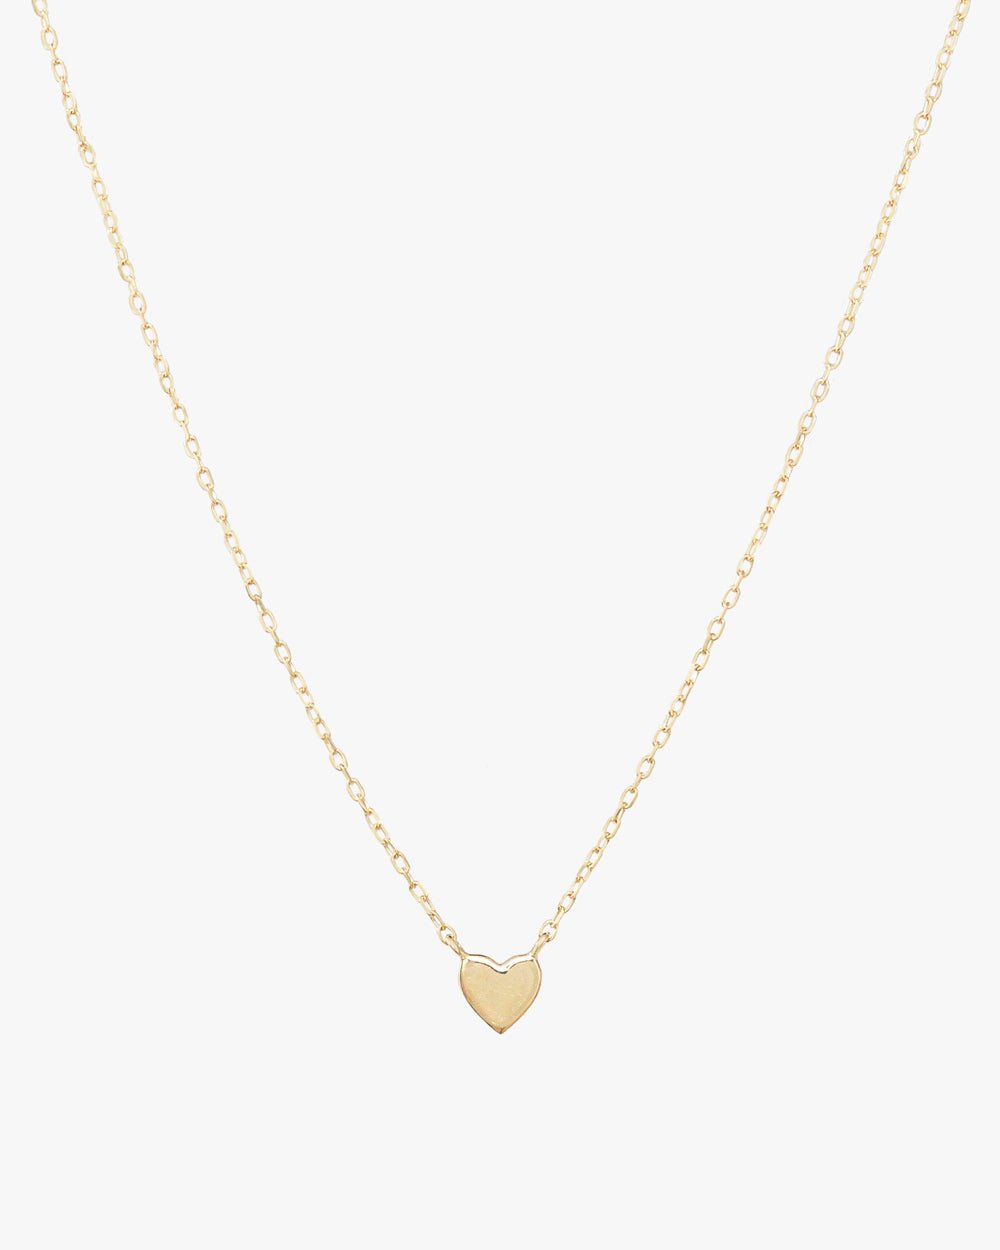 NEWBURY 14K GOLD TEENY HEART NECKLACE - Shop Cupcakes and Cashmere